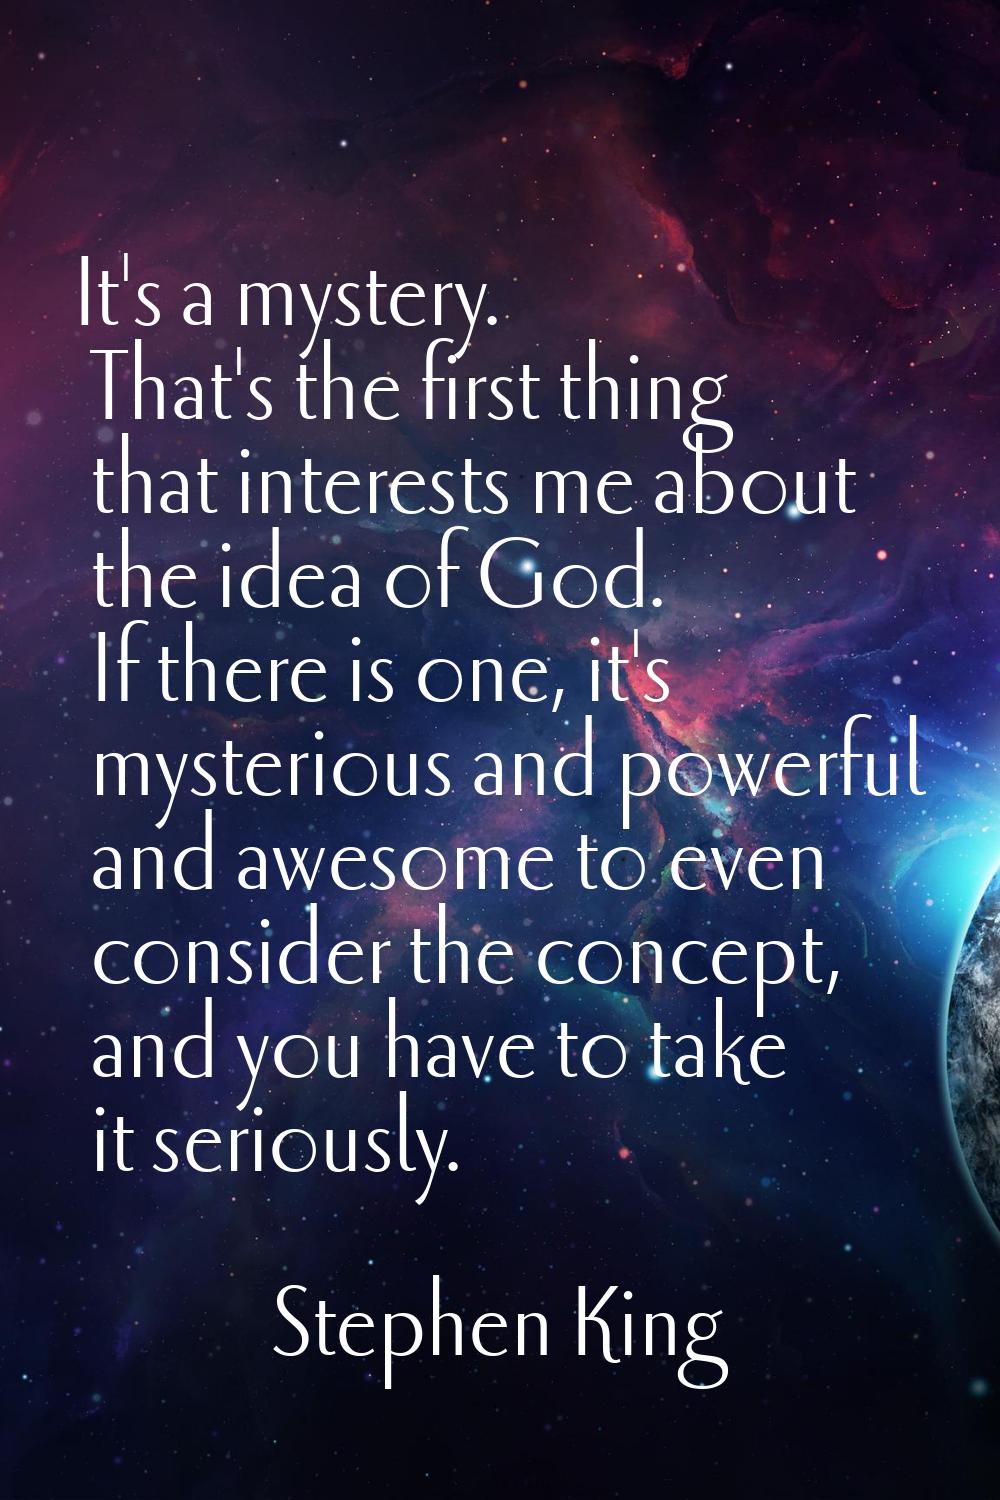 It's a mystery. That's the first thing that interests me about the idea of God. If there is one, it